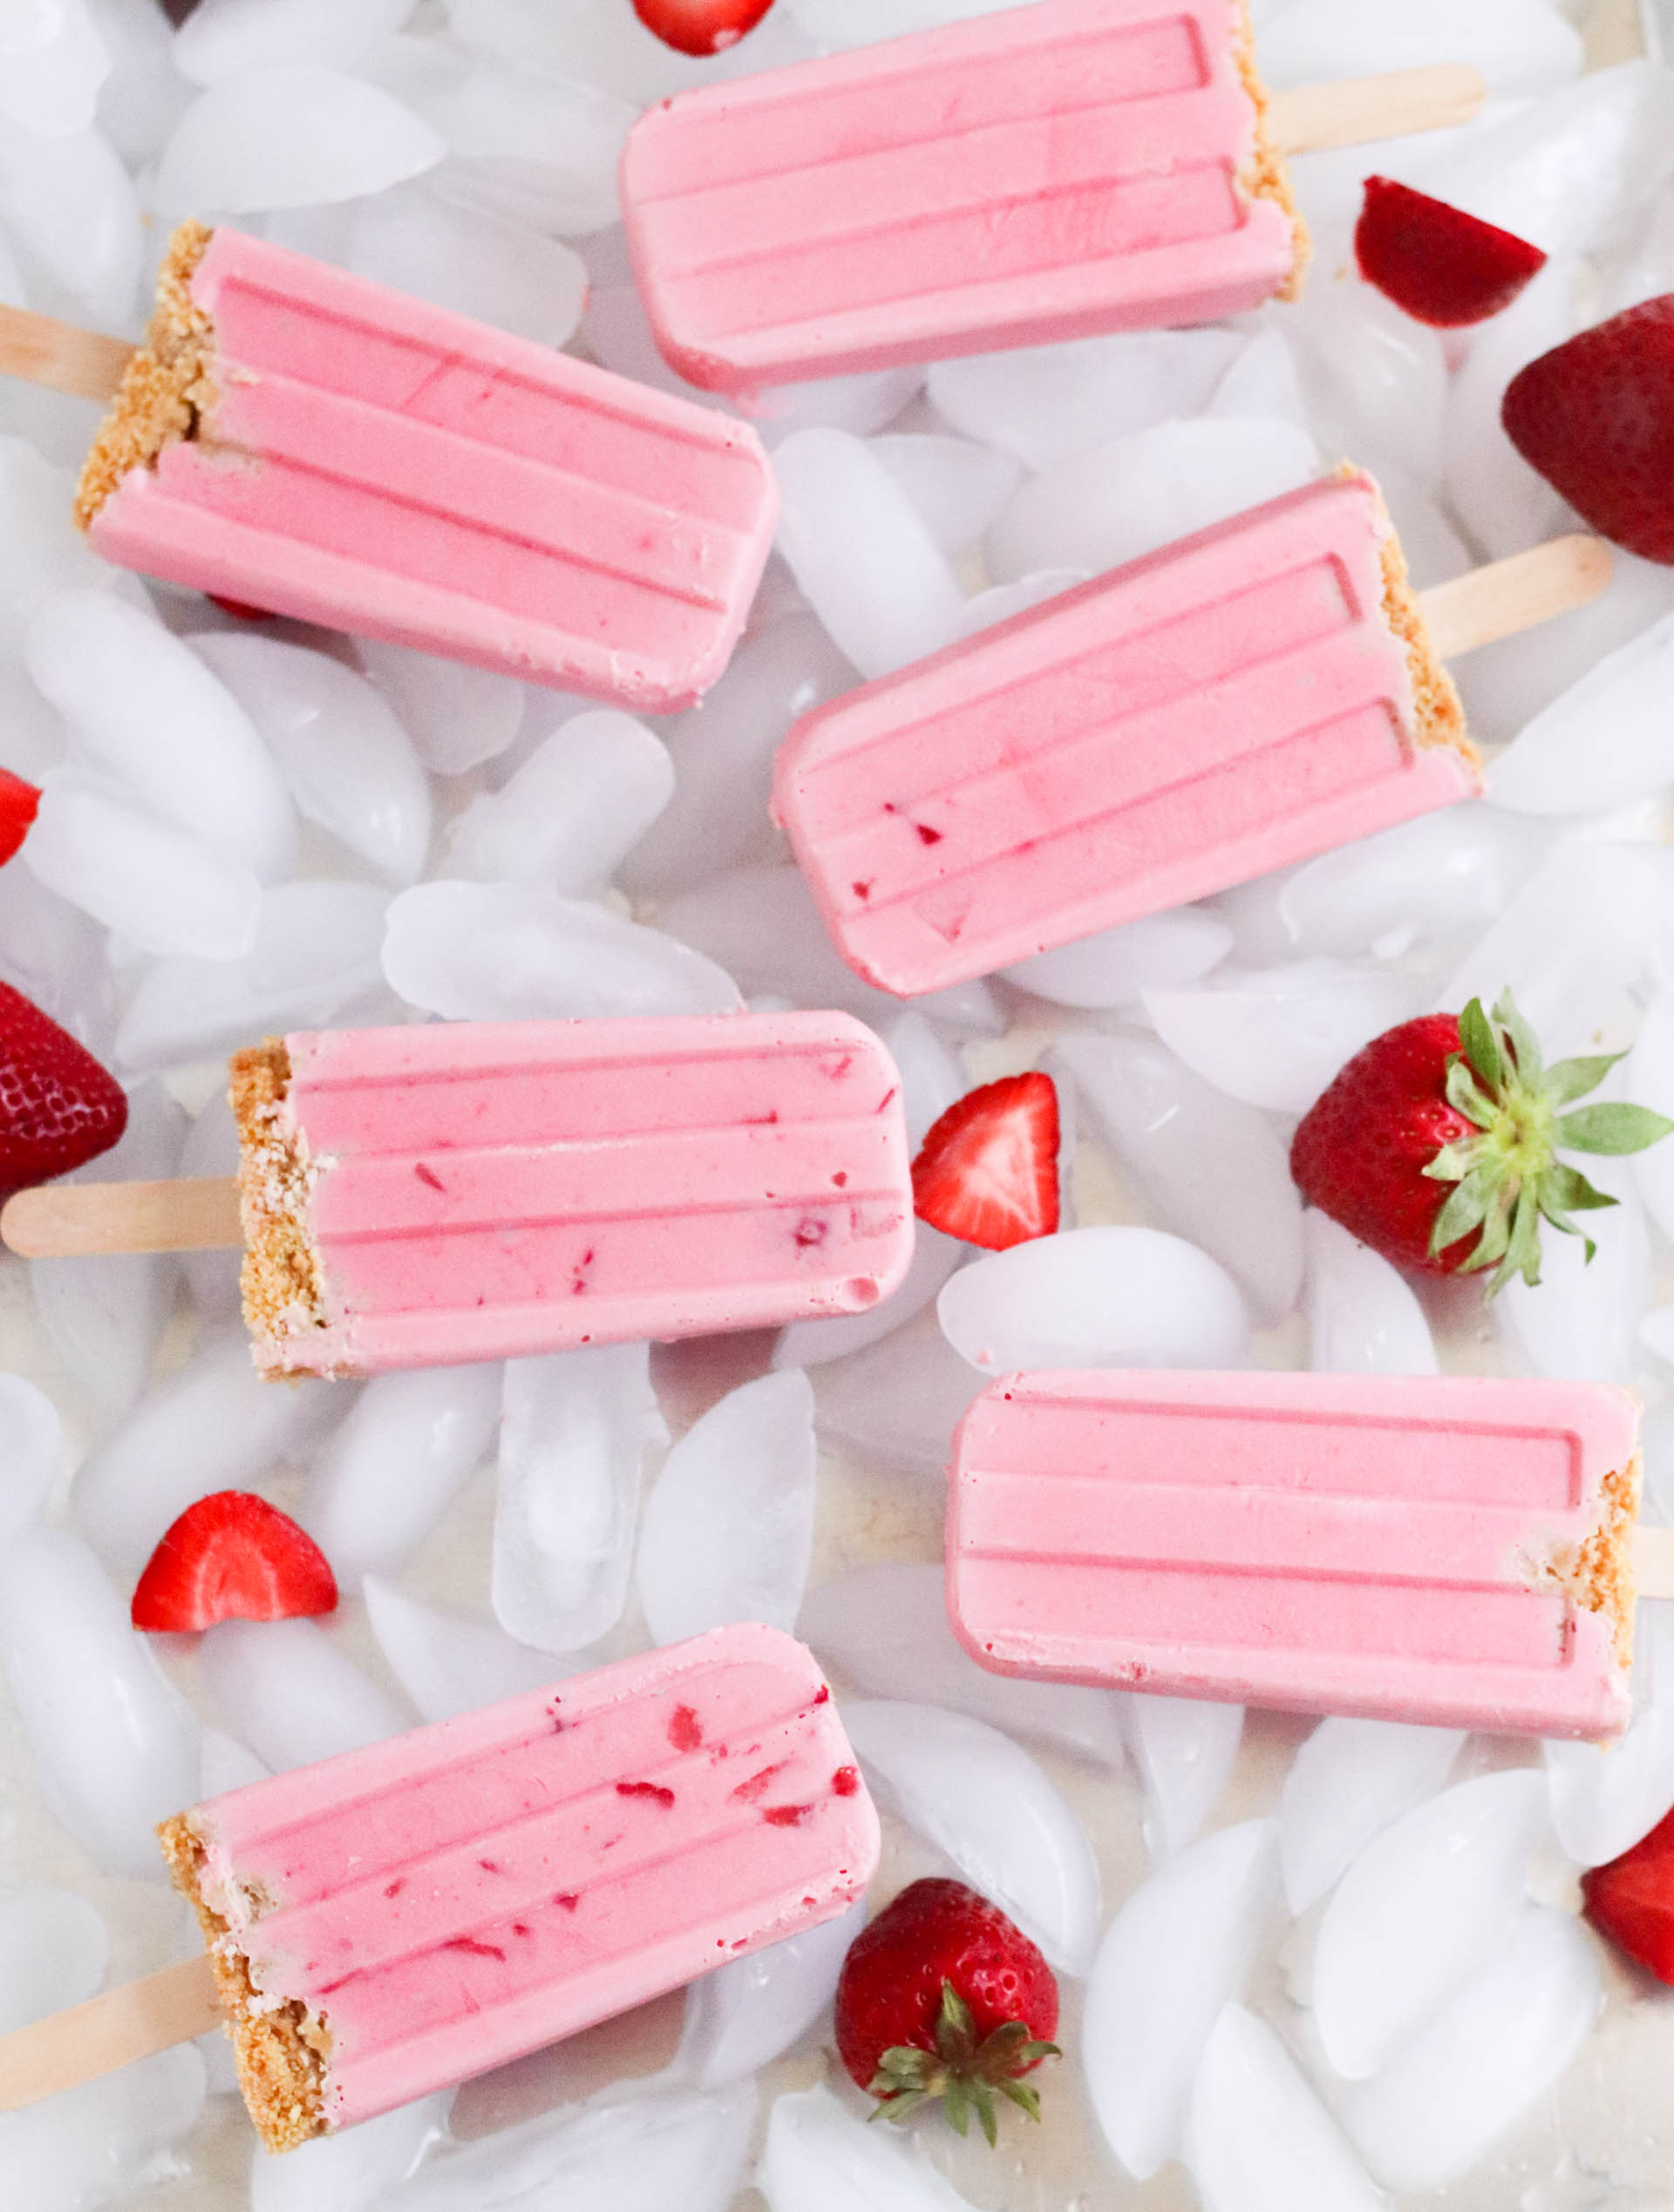 Strawberry Cheesecake Popsicles on ice with fresh strawberries